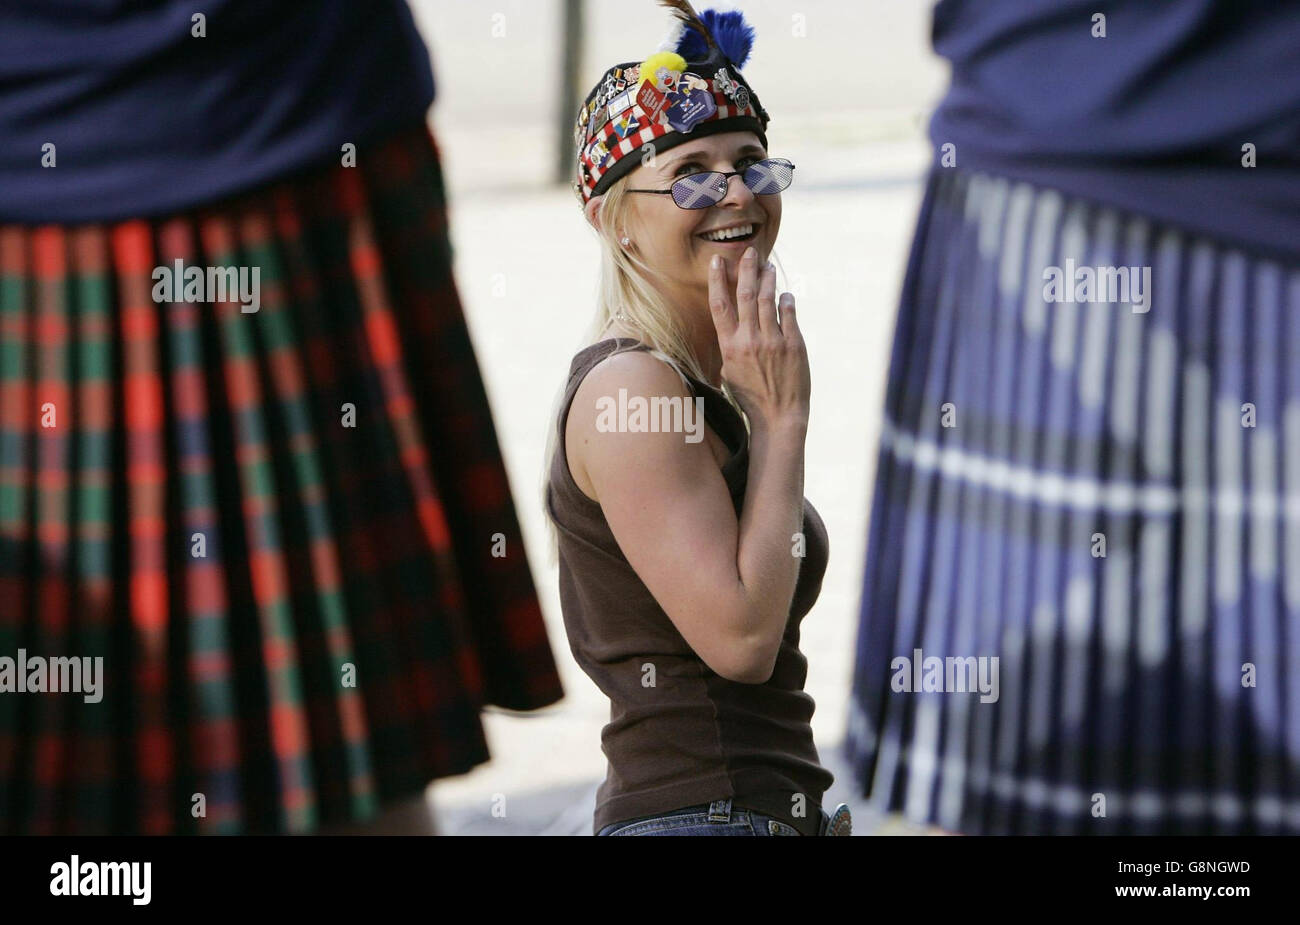 Norwegian Eleonora Margrethe Fjar Lindland (30) wearing a glengarry hats looks at a kilted Scotsman in Oslo, Norway, Tuesday September 6, 2005 ahead of Scotland's match against Norway in a World Cup qualifier tomorrow evening. PRESS ASSOCIATION Photo. Photo credit should read: Andrew Milligan/PA Stock Photo